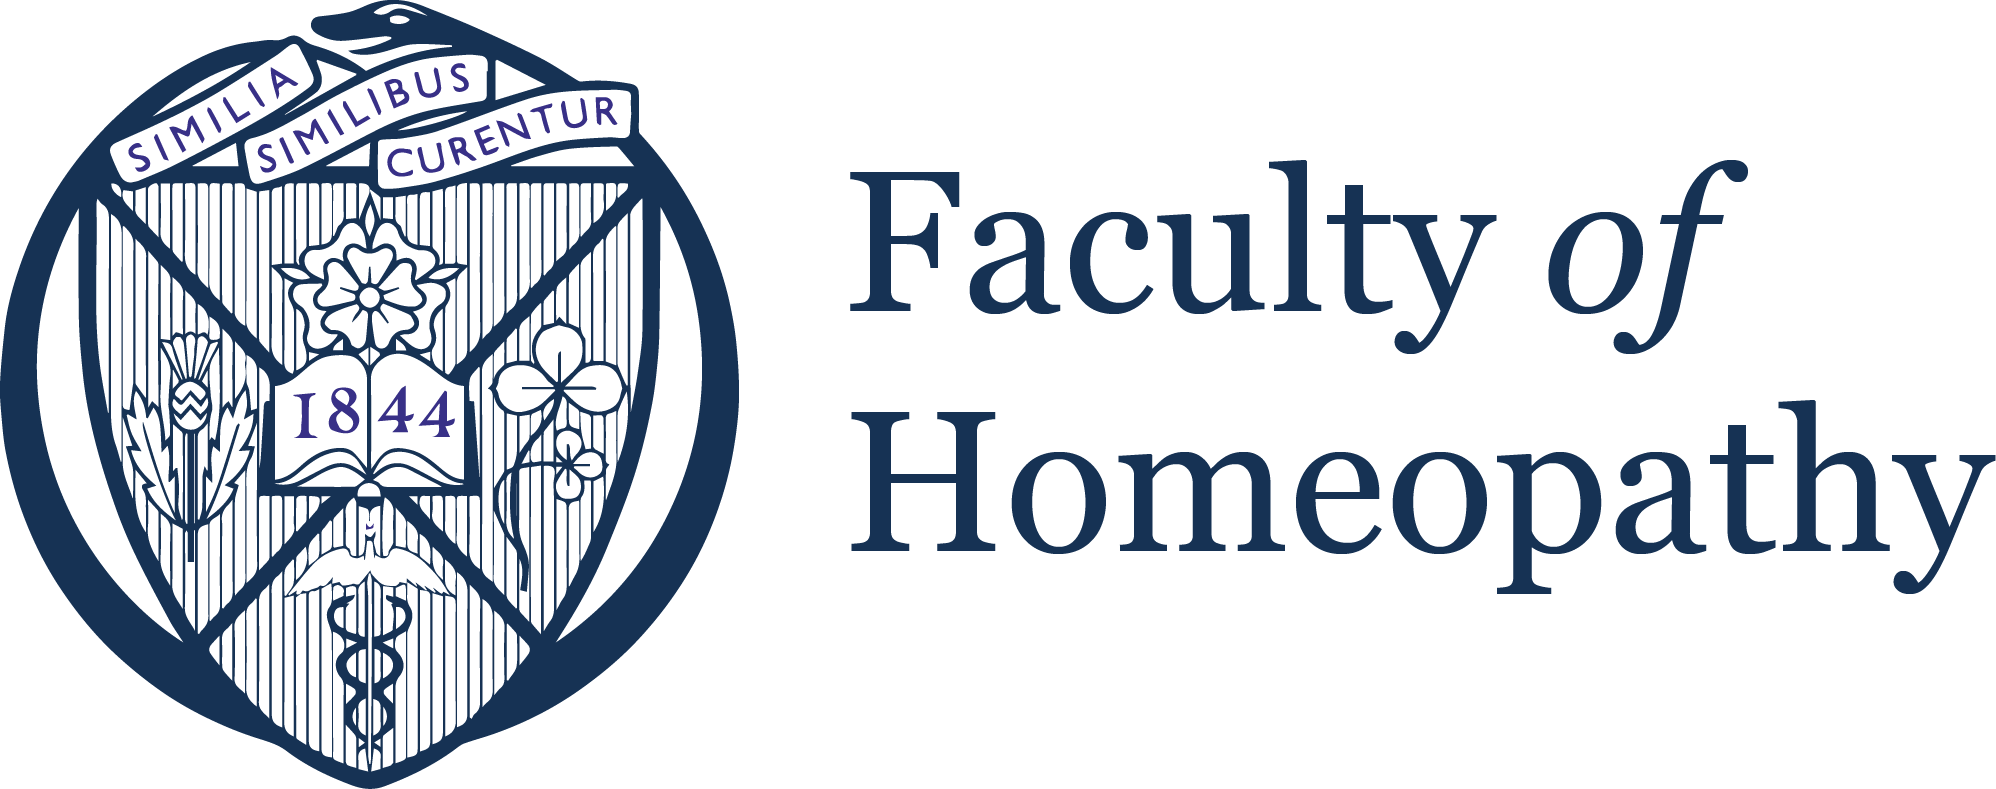 Winner Image - Faculty of Homeopathy